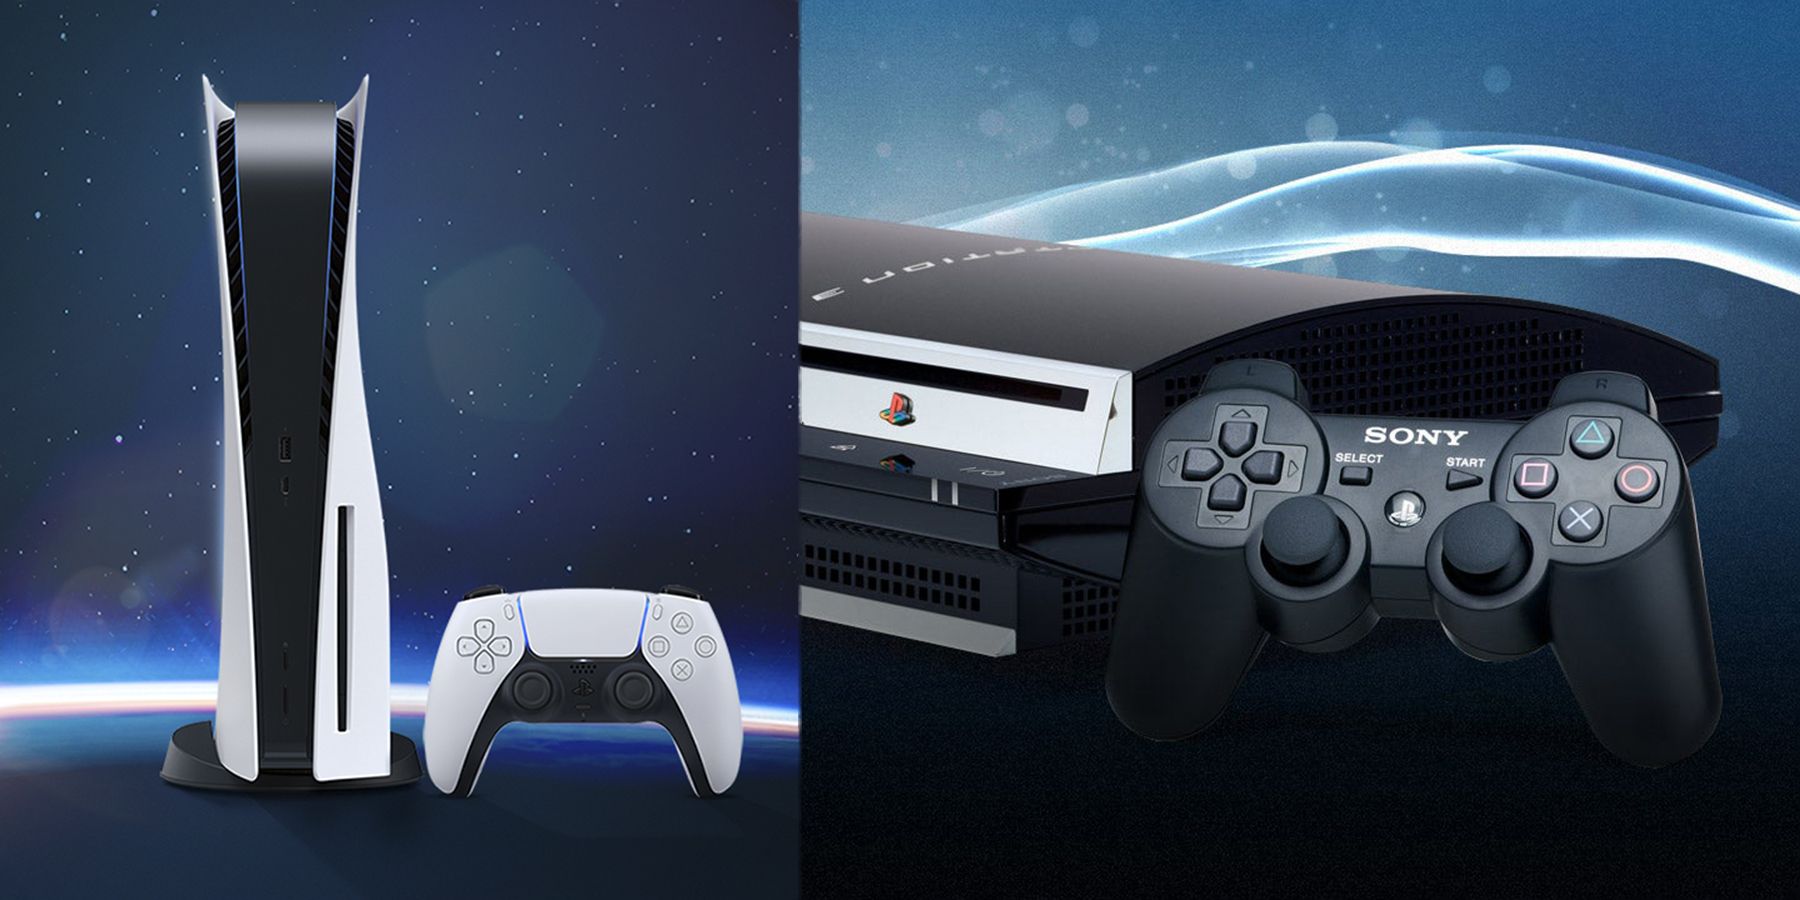 PlayStation Store gets PS3 games: is PS5 backwards compatibility next?